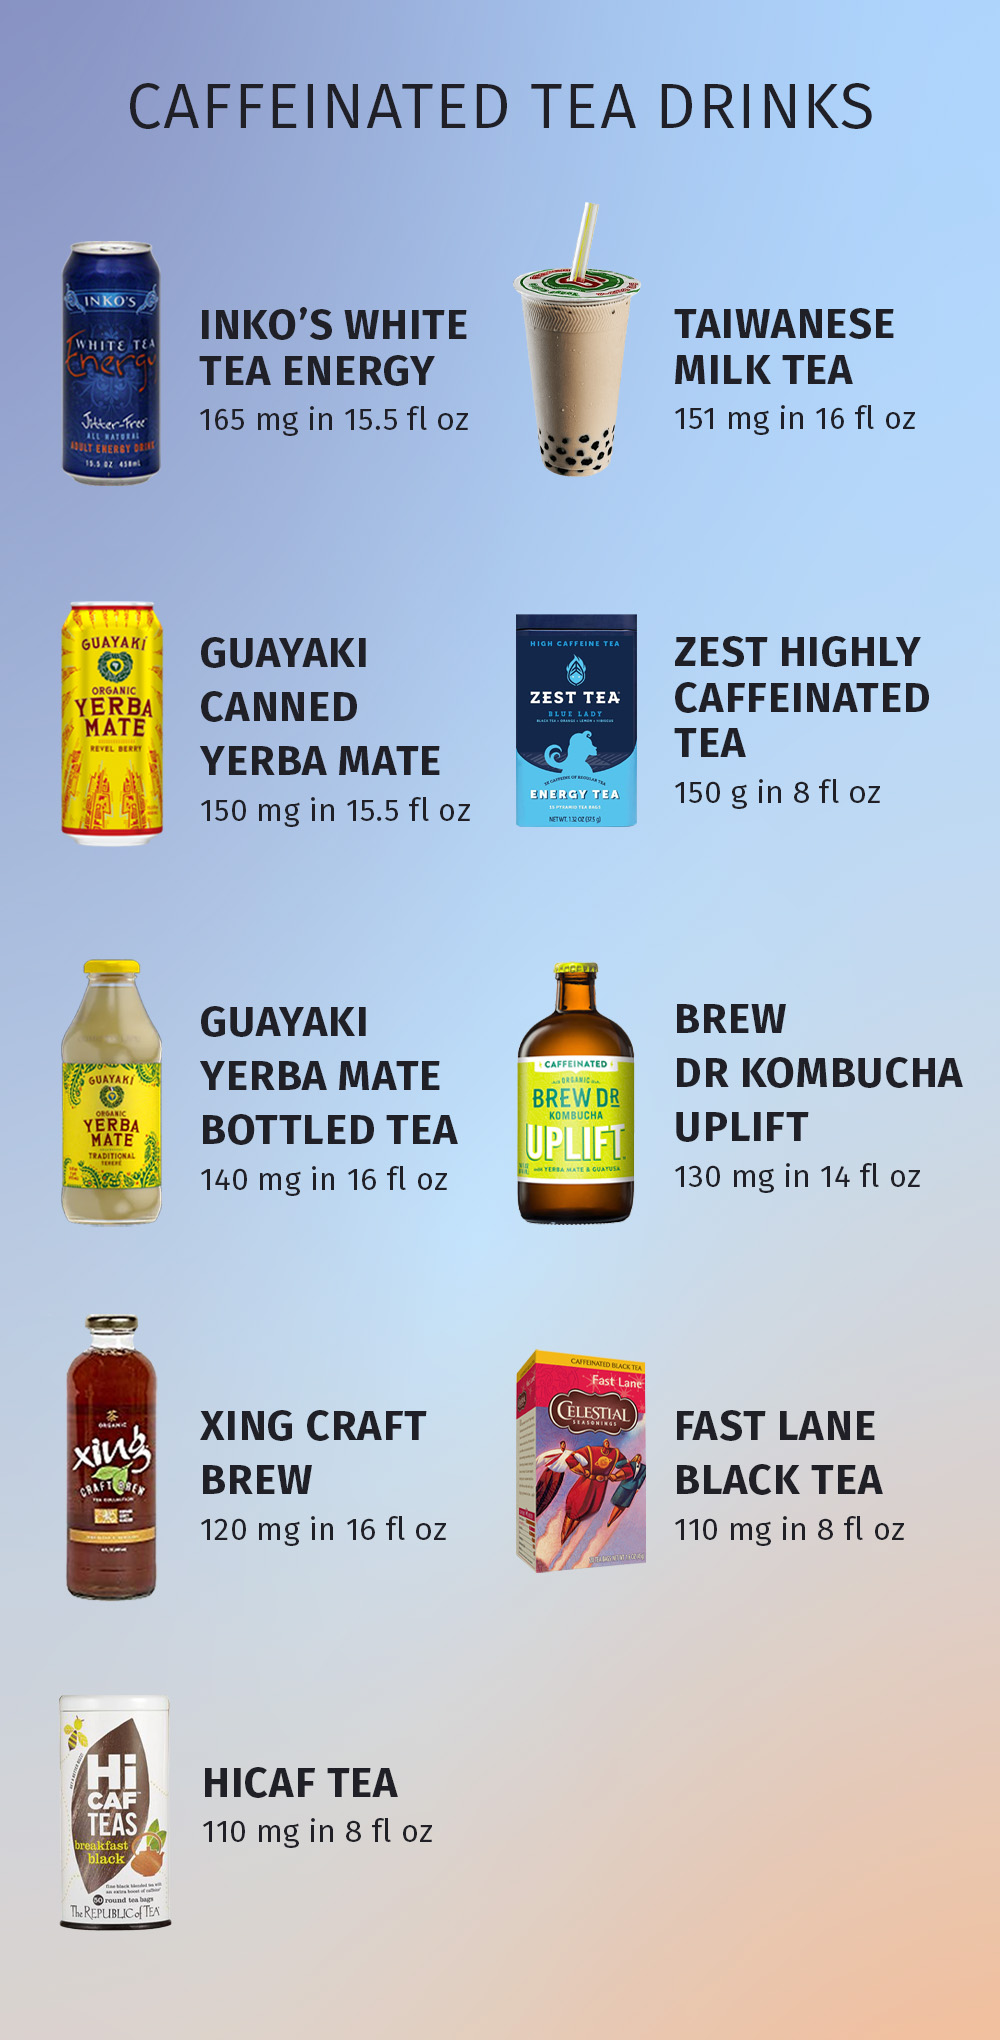 infographic showing tea drinks with caffeine